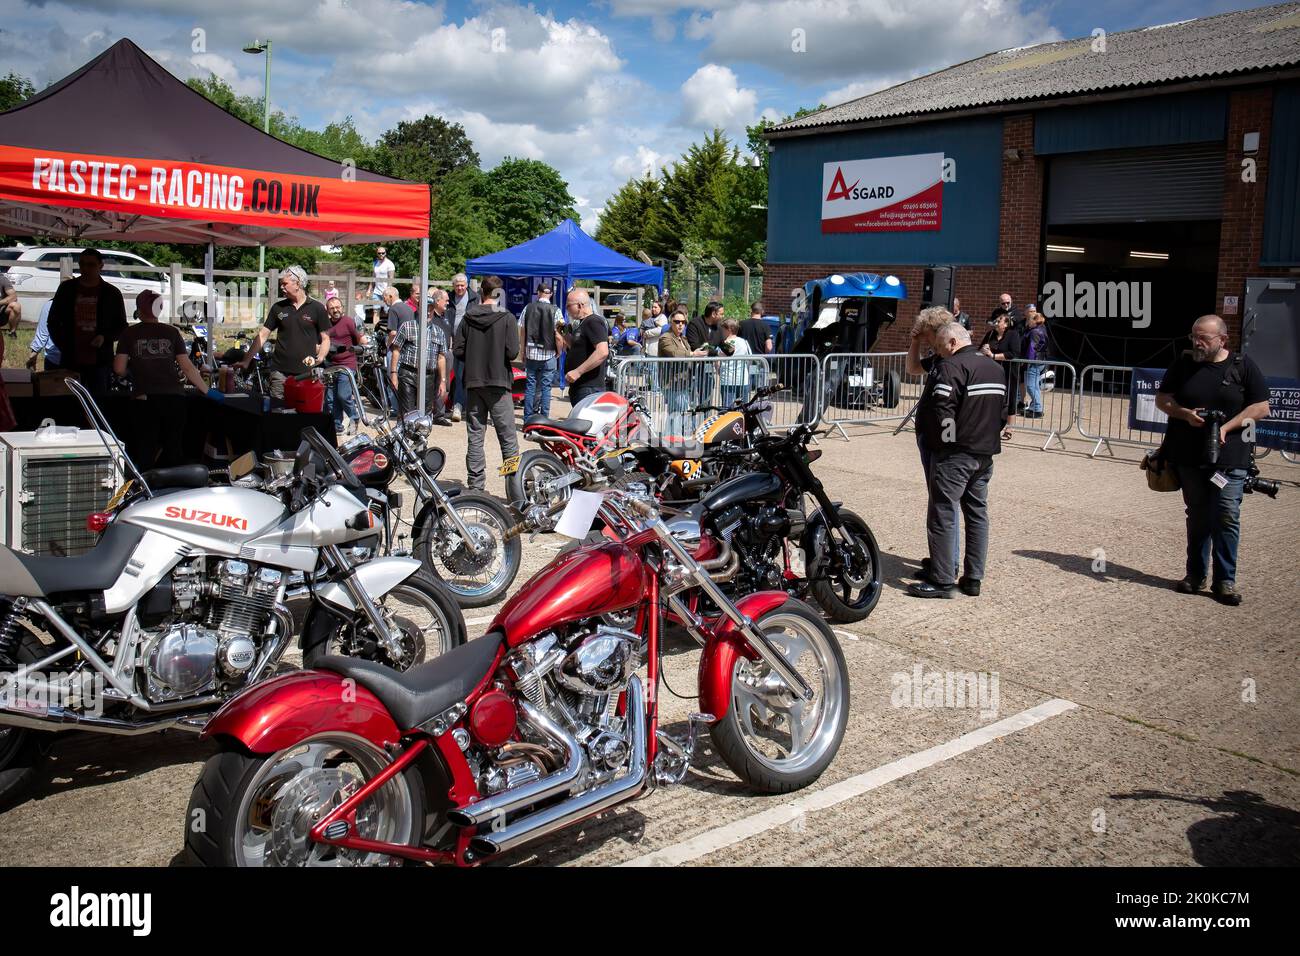 The admirers looking at powerful motorcycles at a show Stock Photo